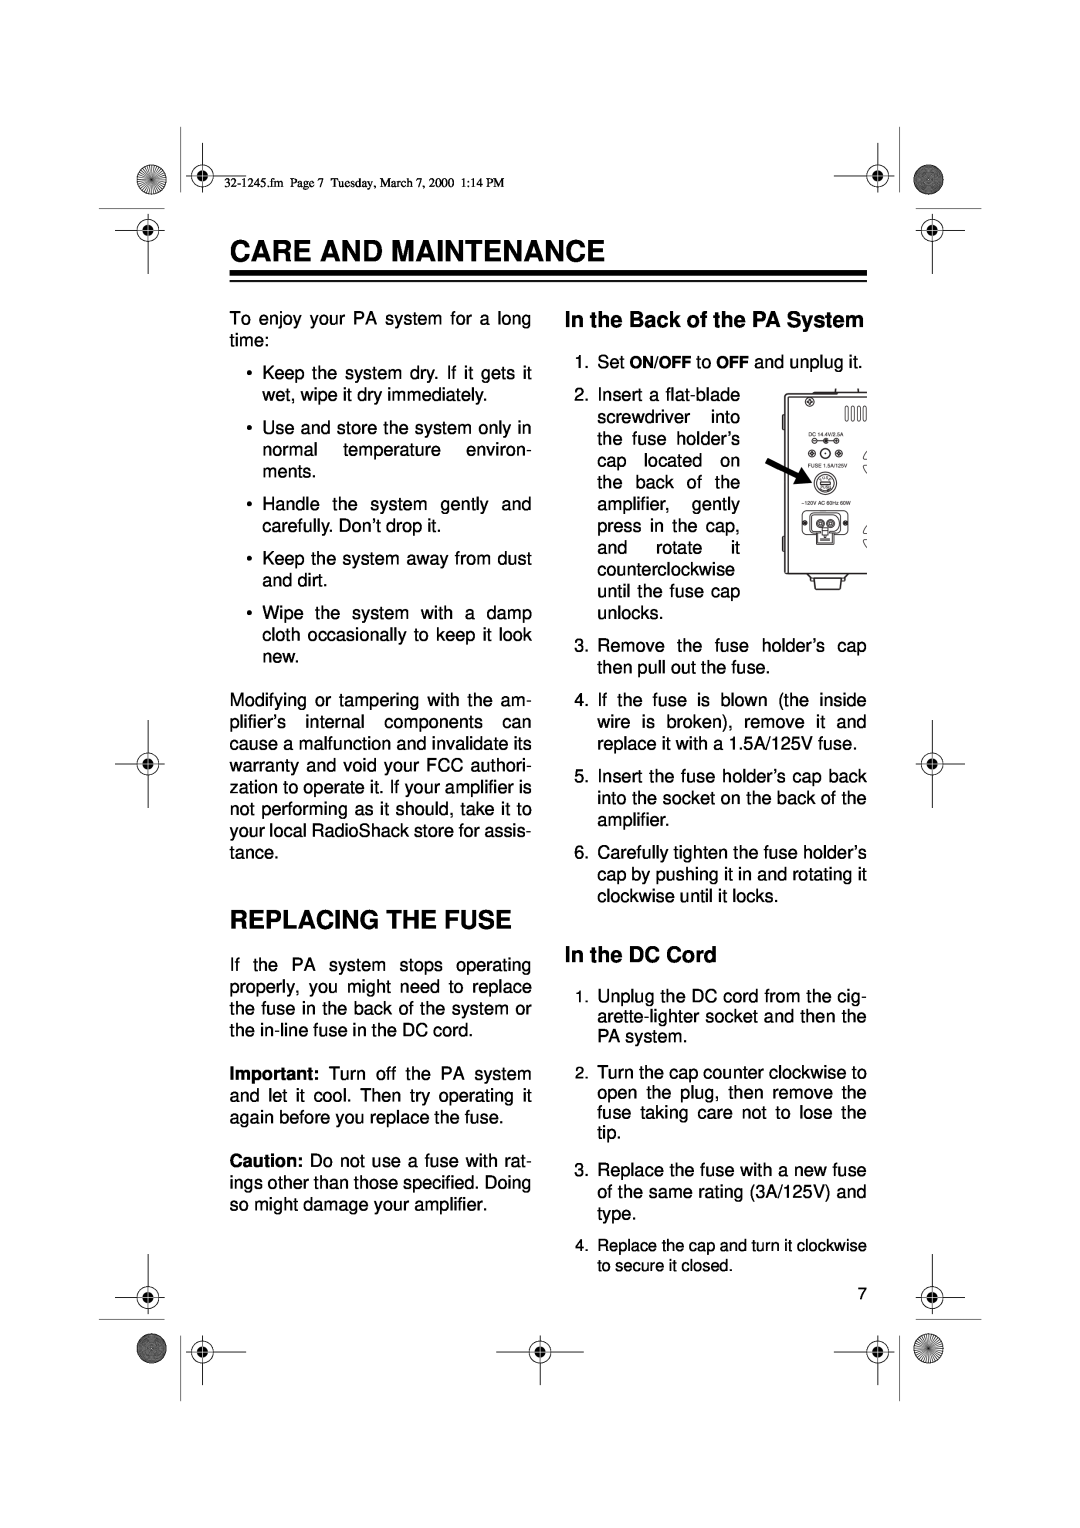 Ricoh 32-1245 owner manual Care And Maintenance, Replacing The Fuse, In the Back of the PA System, In the DC Cord 